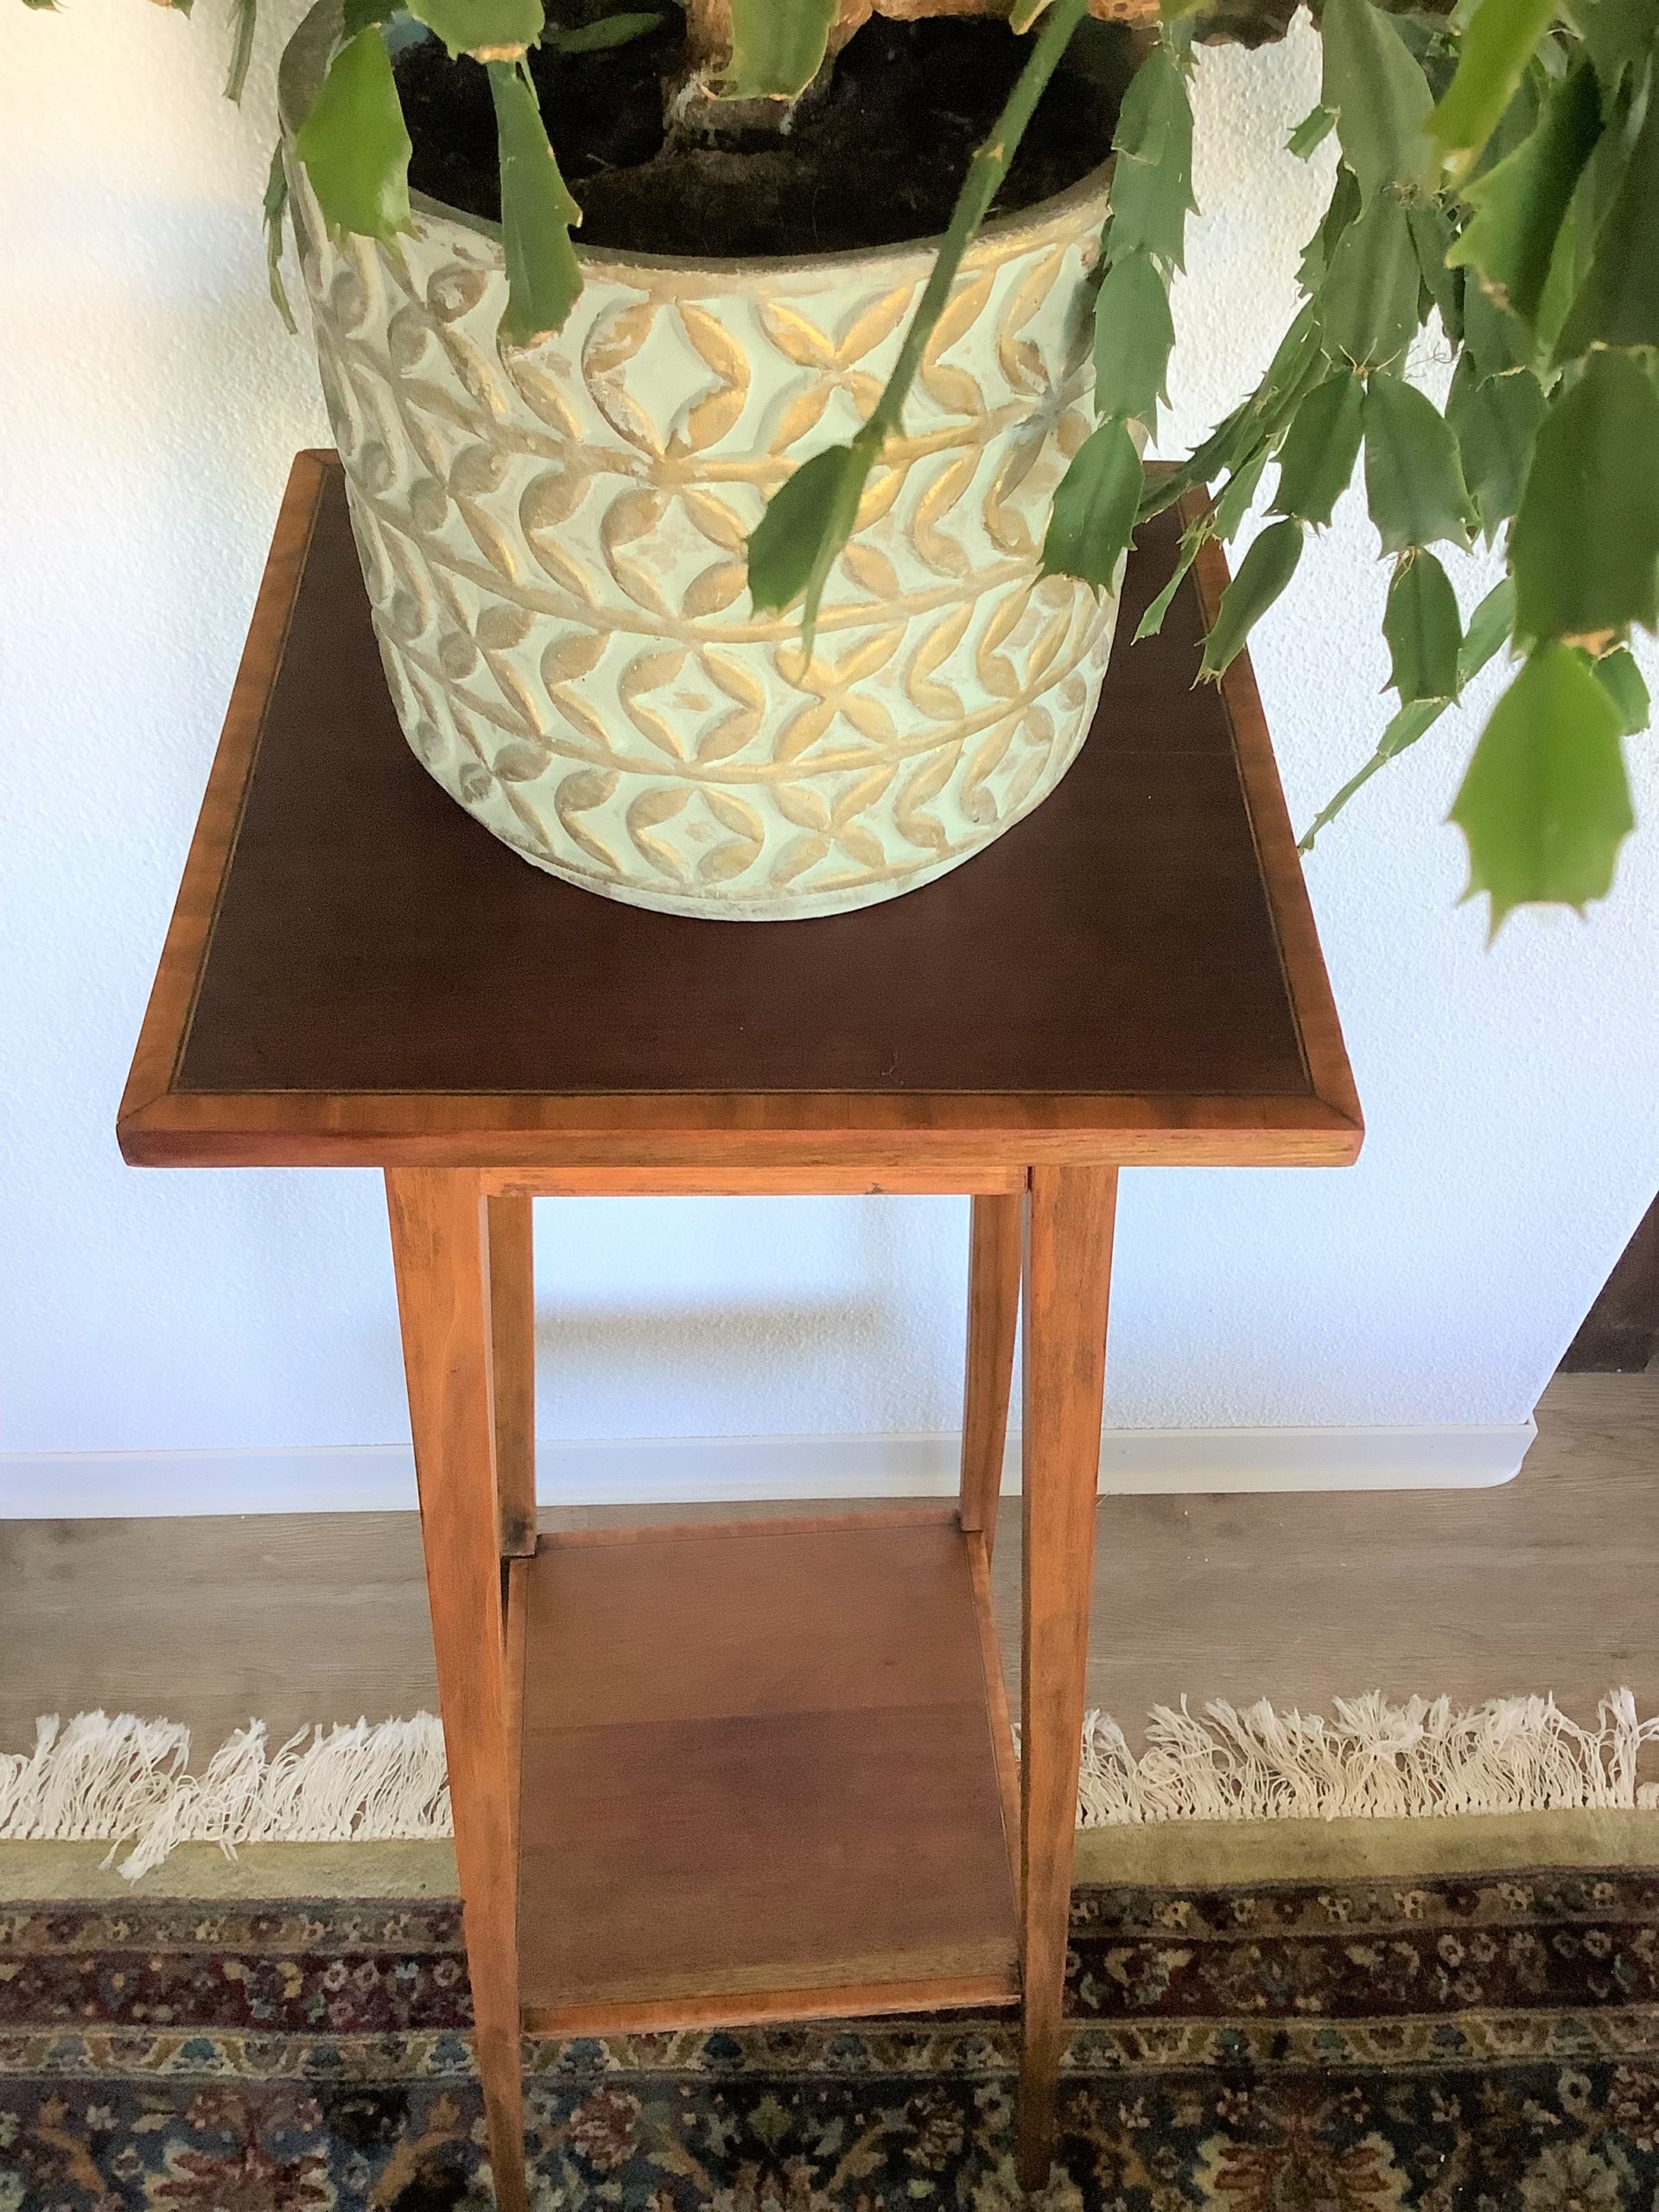 Restored turn-of-the-century plant stand